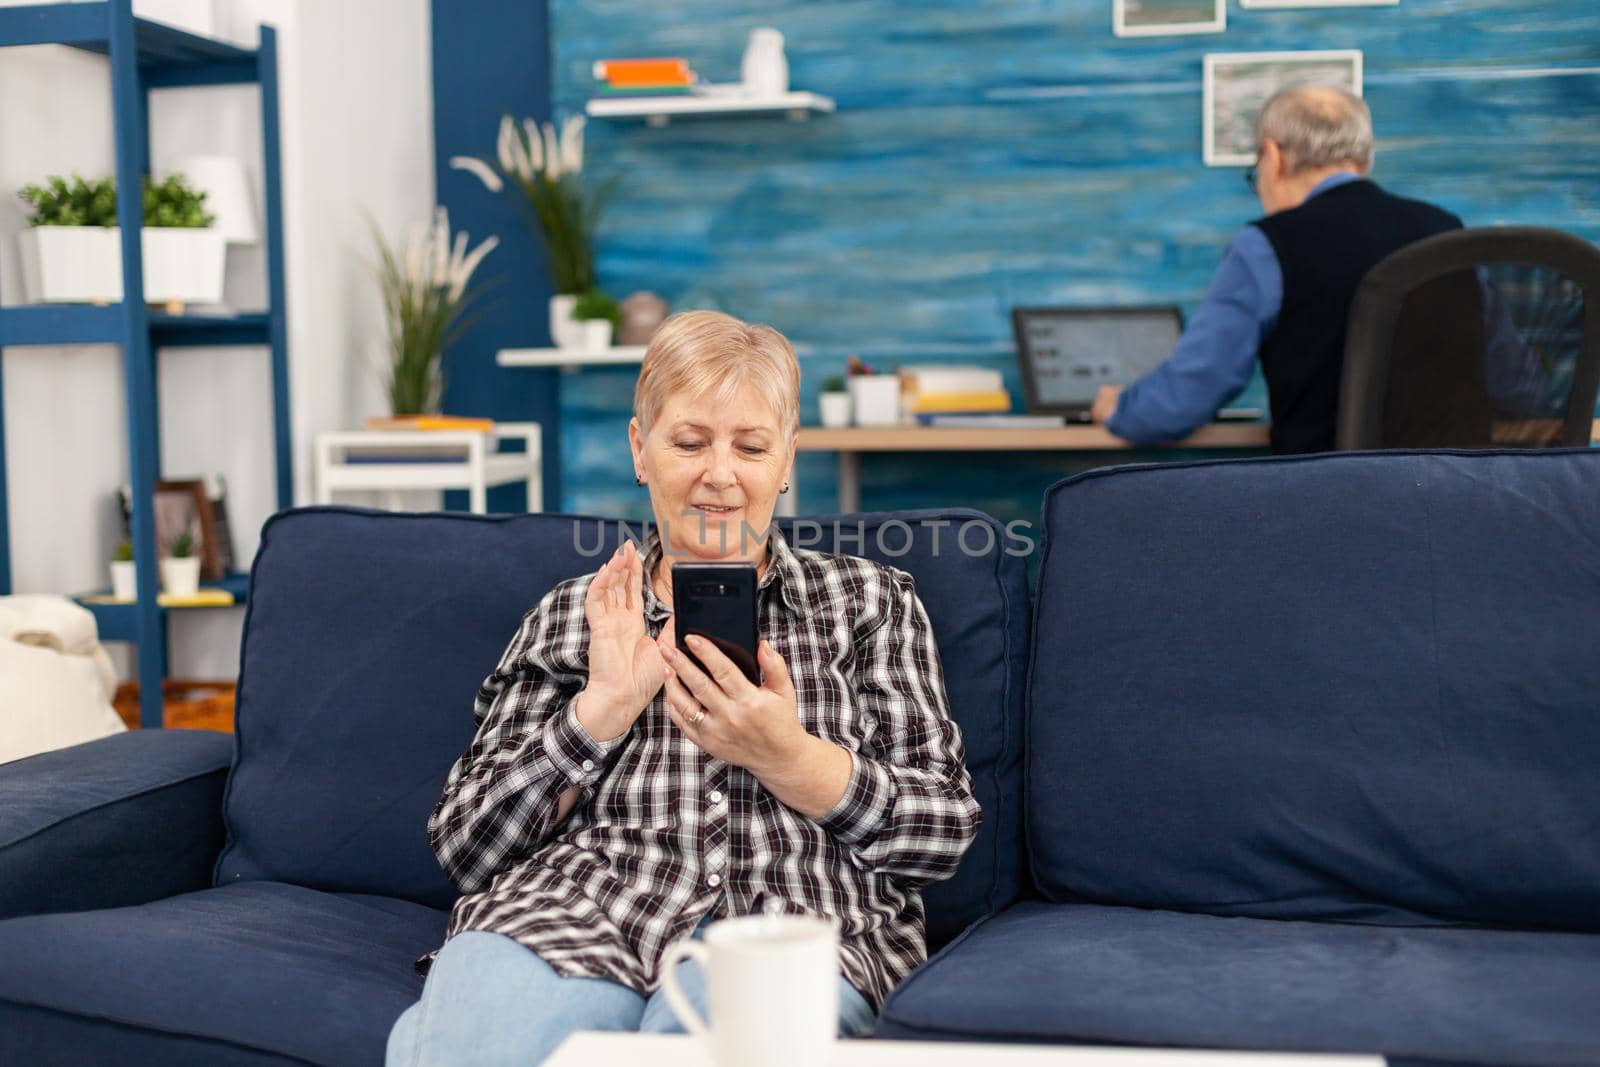 Happy elderly lady waving at smartphone during video call. Senior woman waving at phone webcam in the course of video conference sitting on living room sofa.